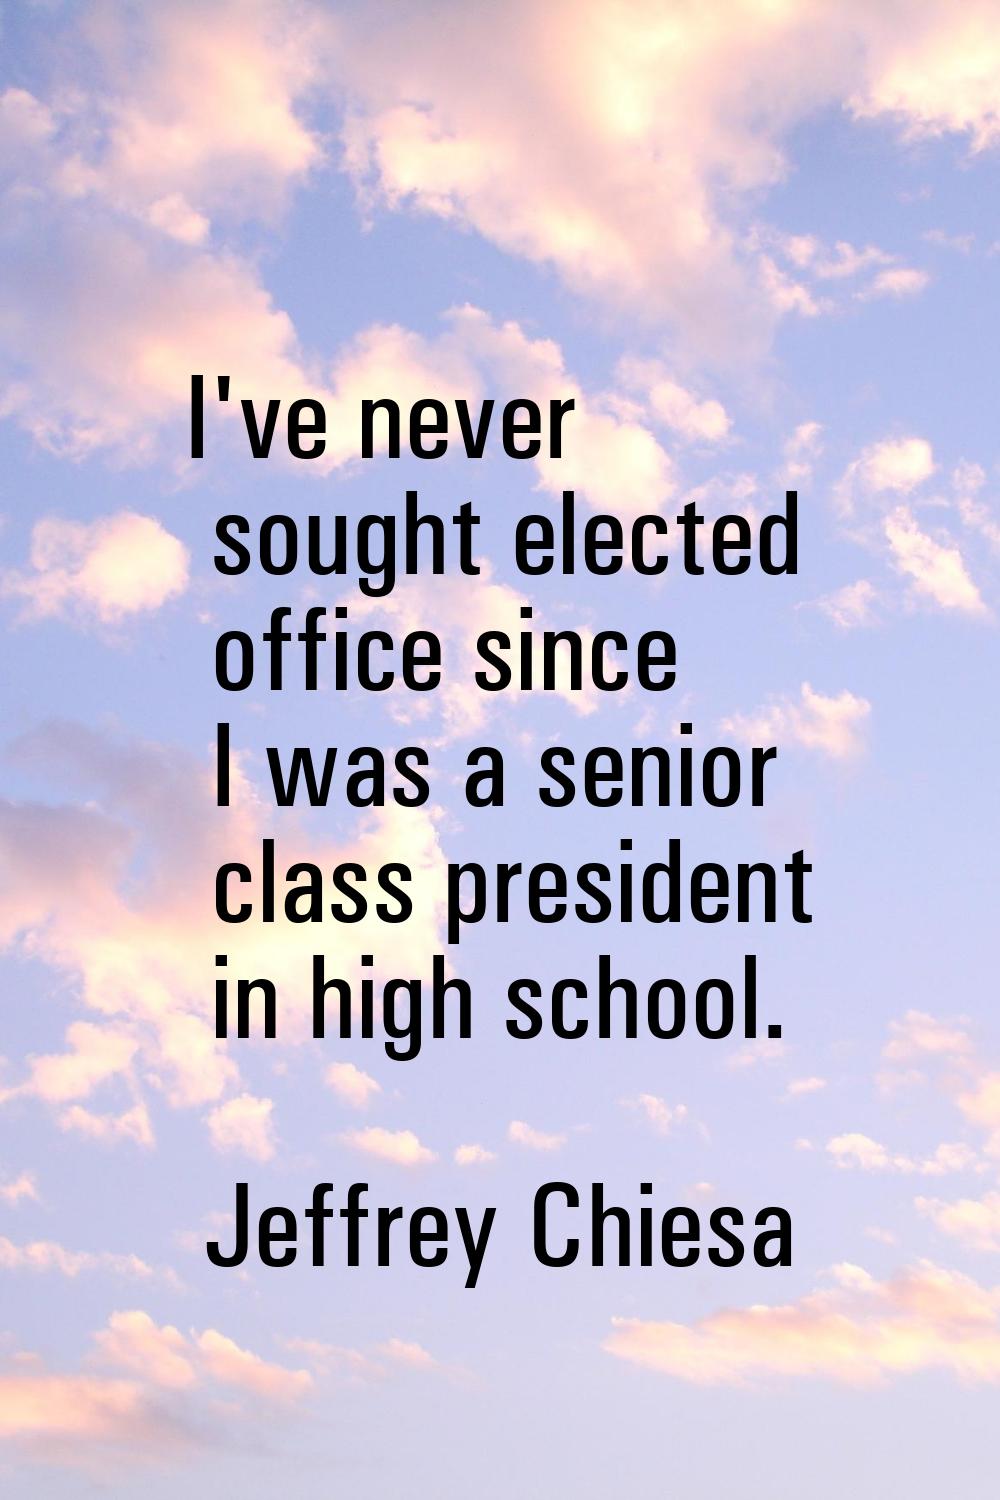 I've never sought elected office since I was a senior class president in high school.